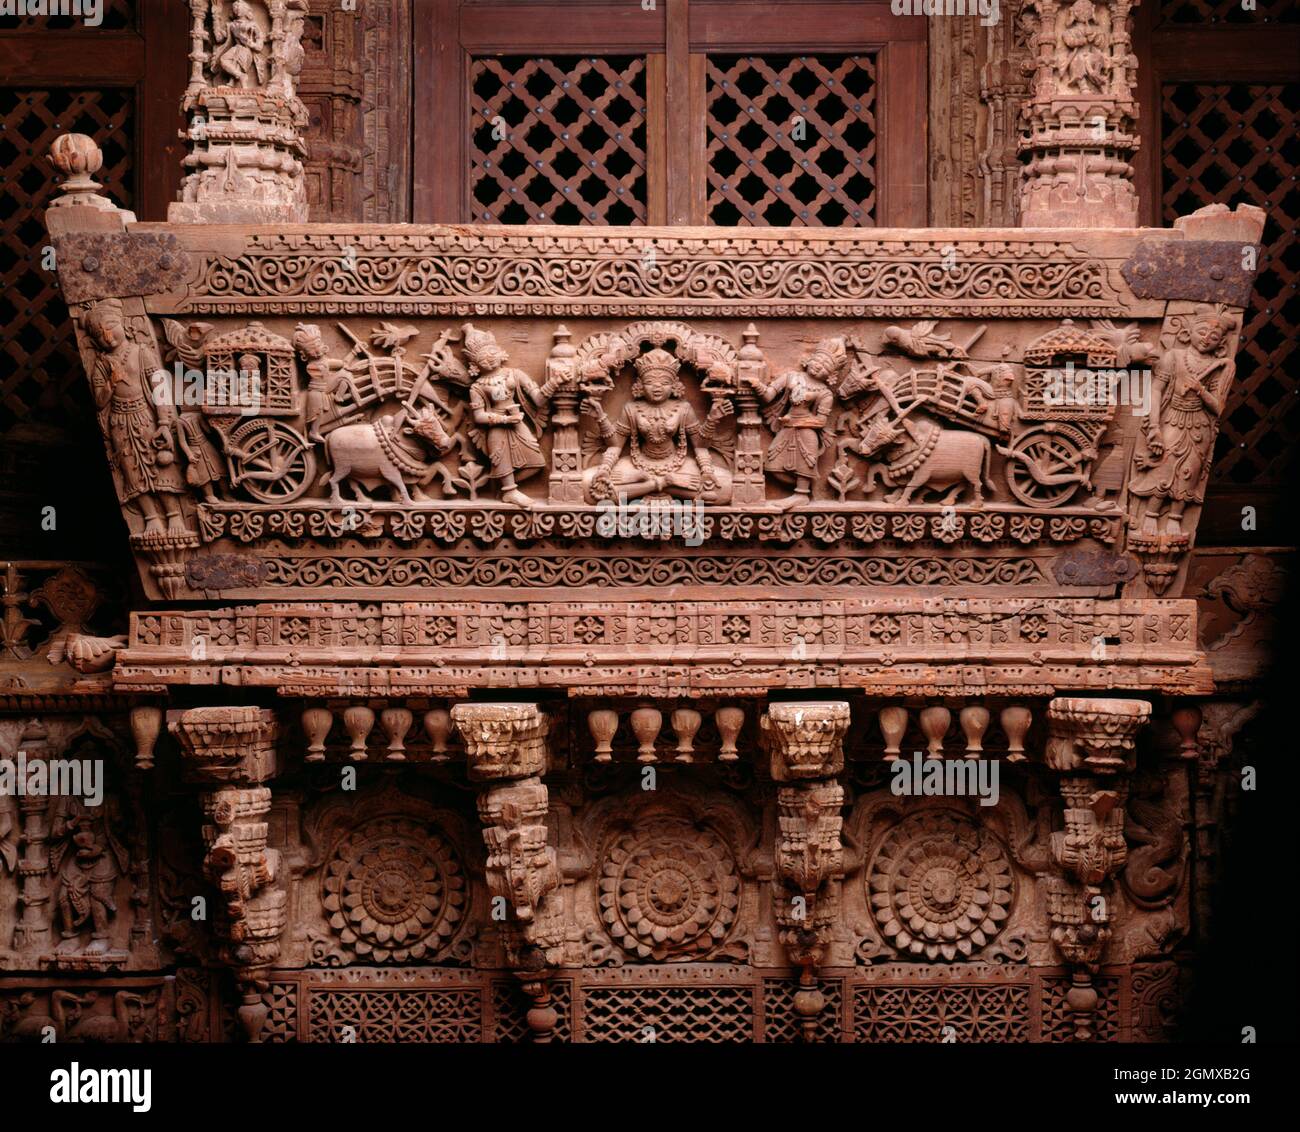 Architectural Ensemble from a Jain Meeting Hall. Date: last quarter of 16th century; Culture: India (Gujarat, Patan); Medium: Teak with traces of Stock Photo